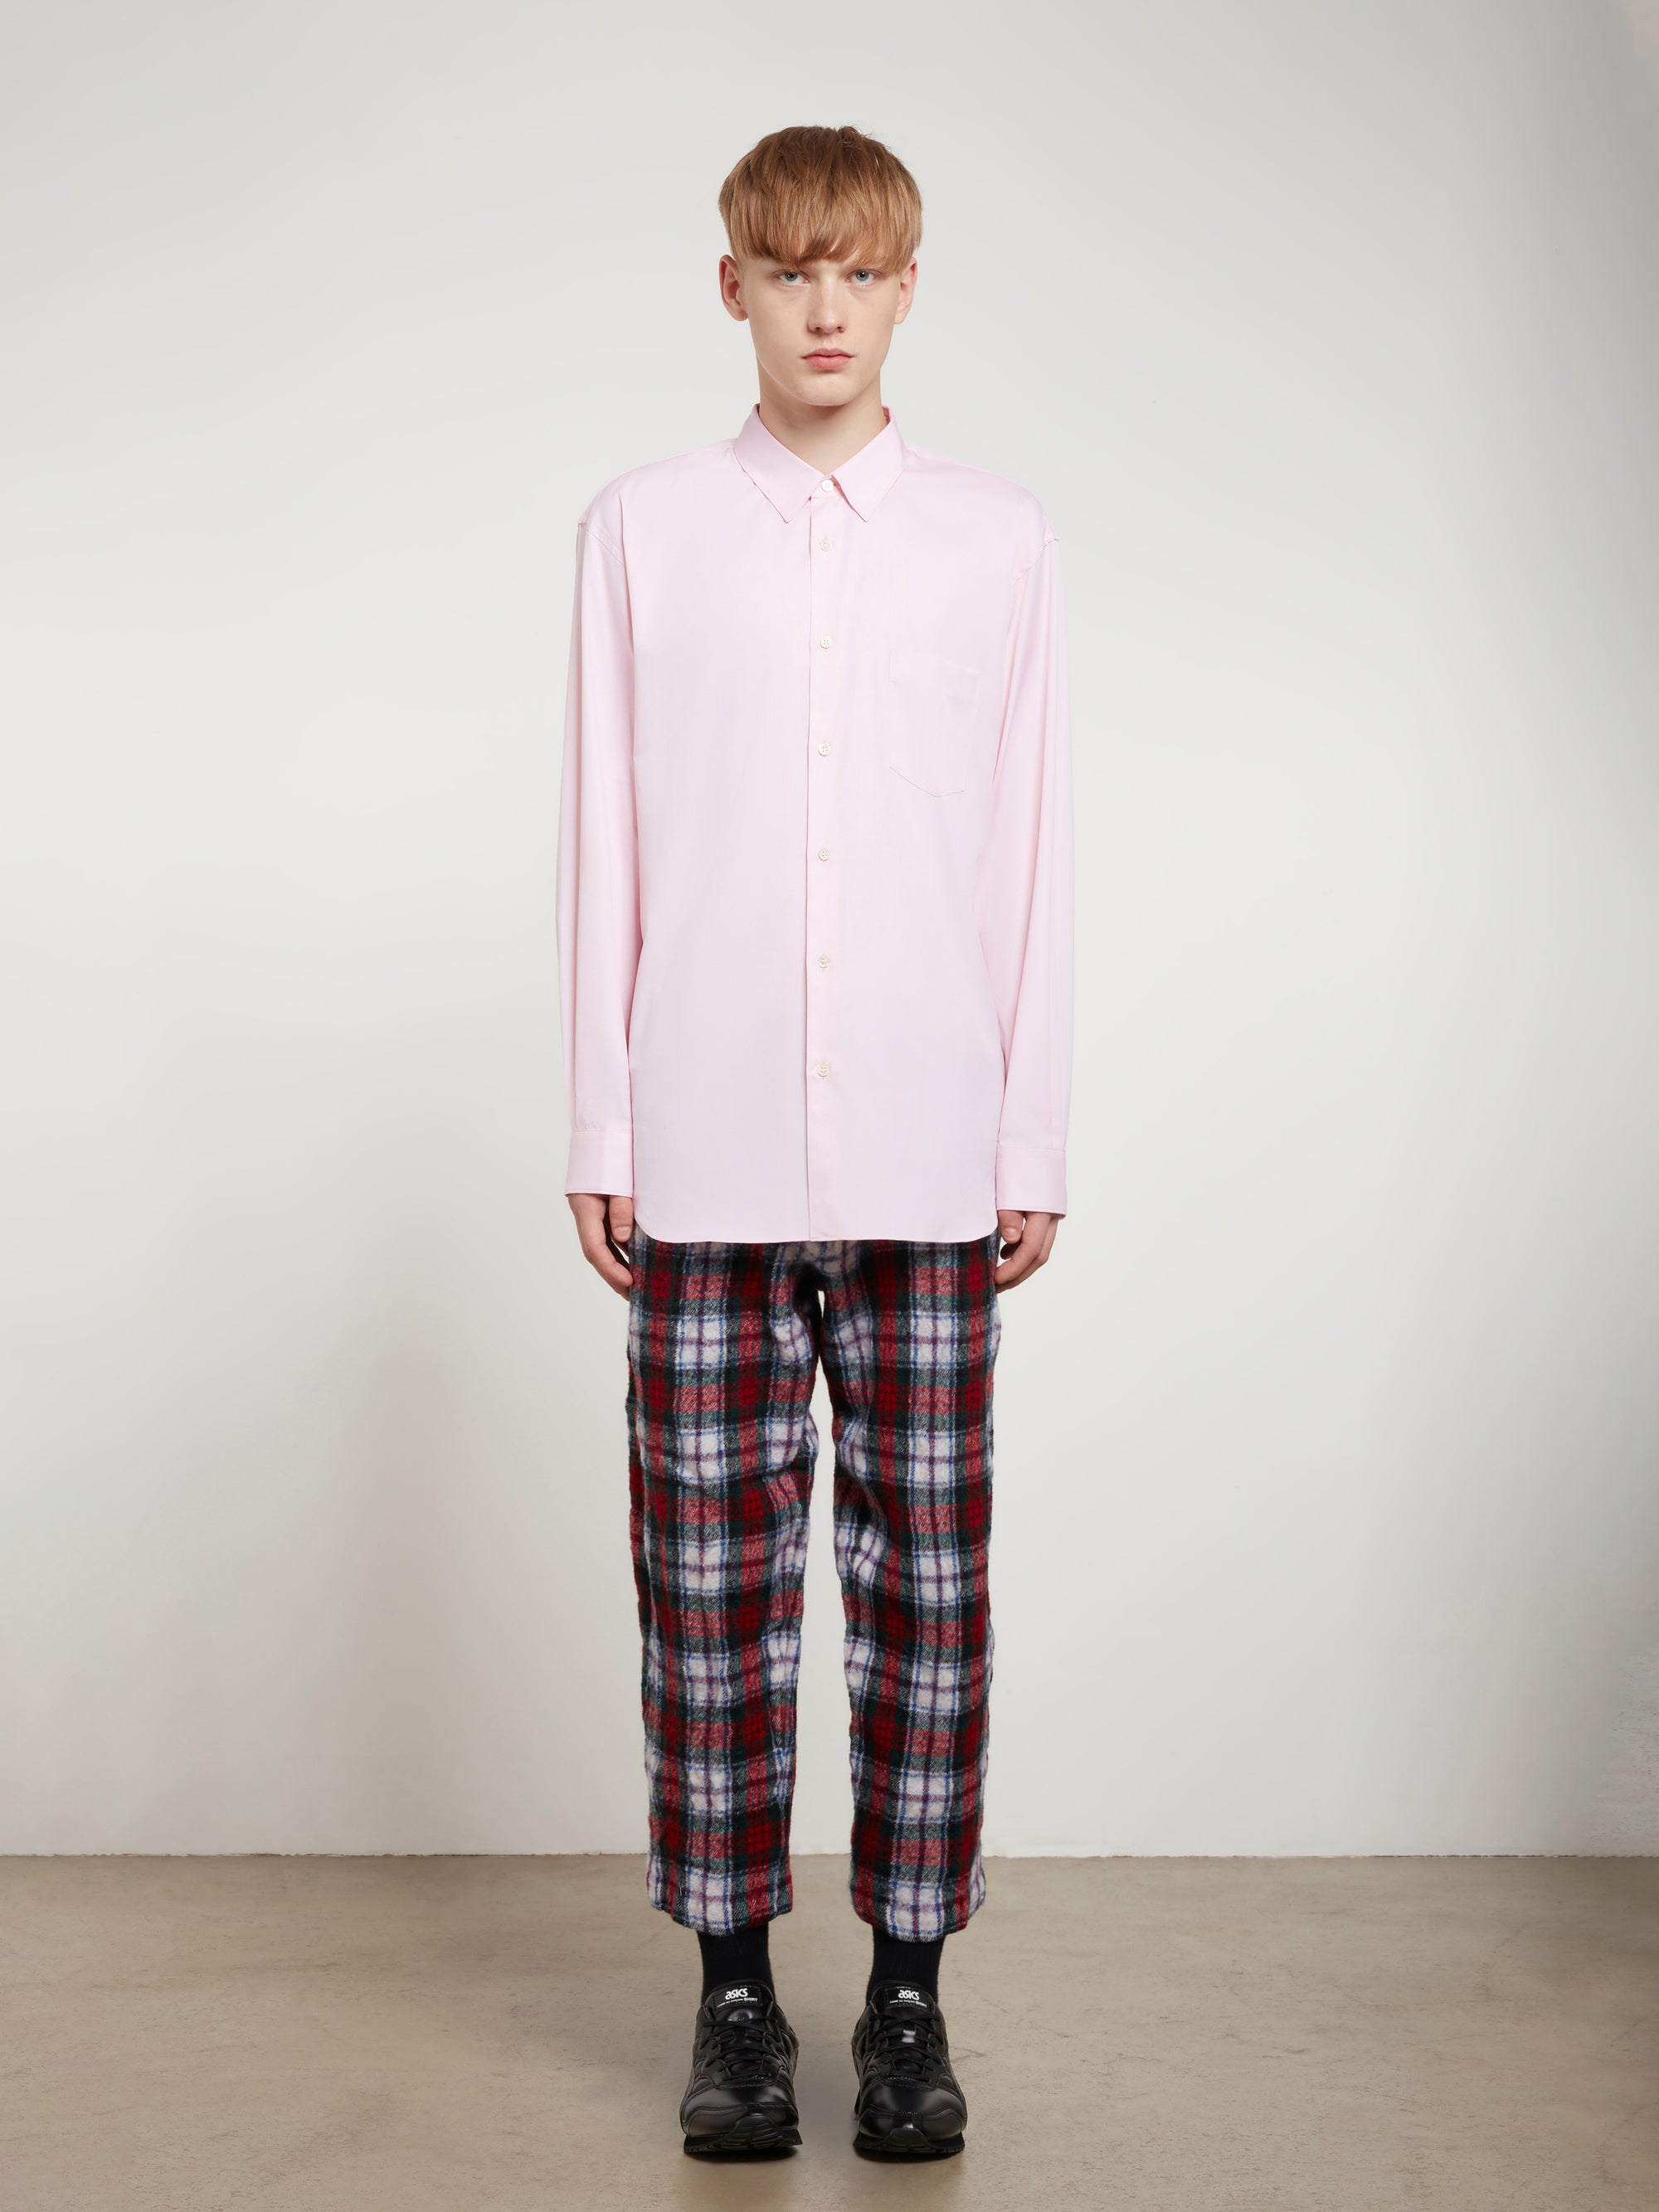 CDG Shirt Forever - Classic Fit Woven Cotton Shirt - (Pink) view 5